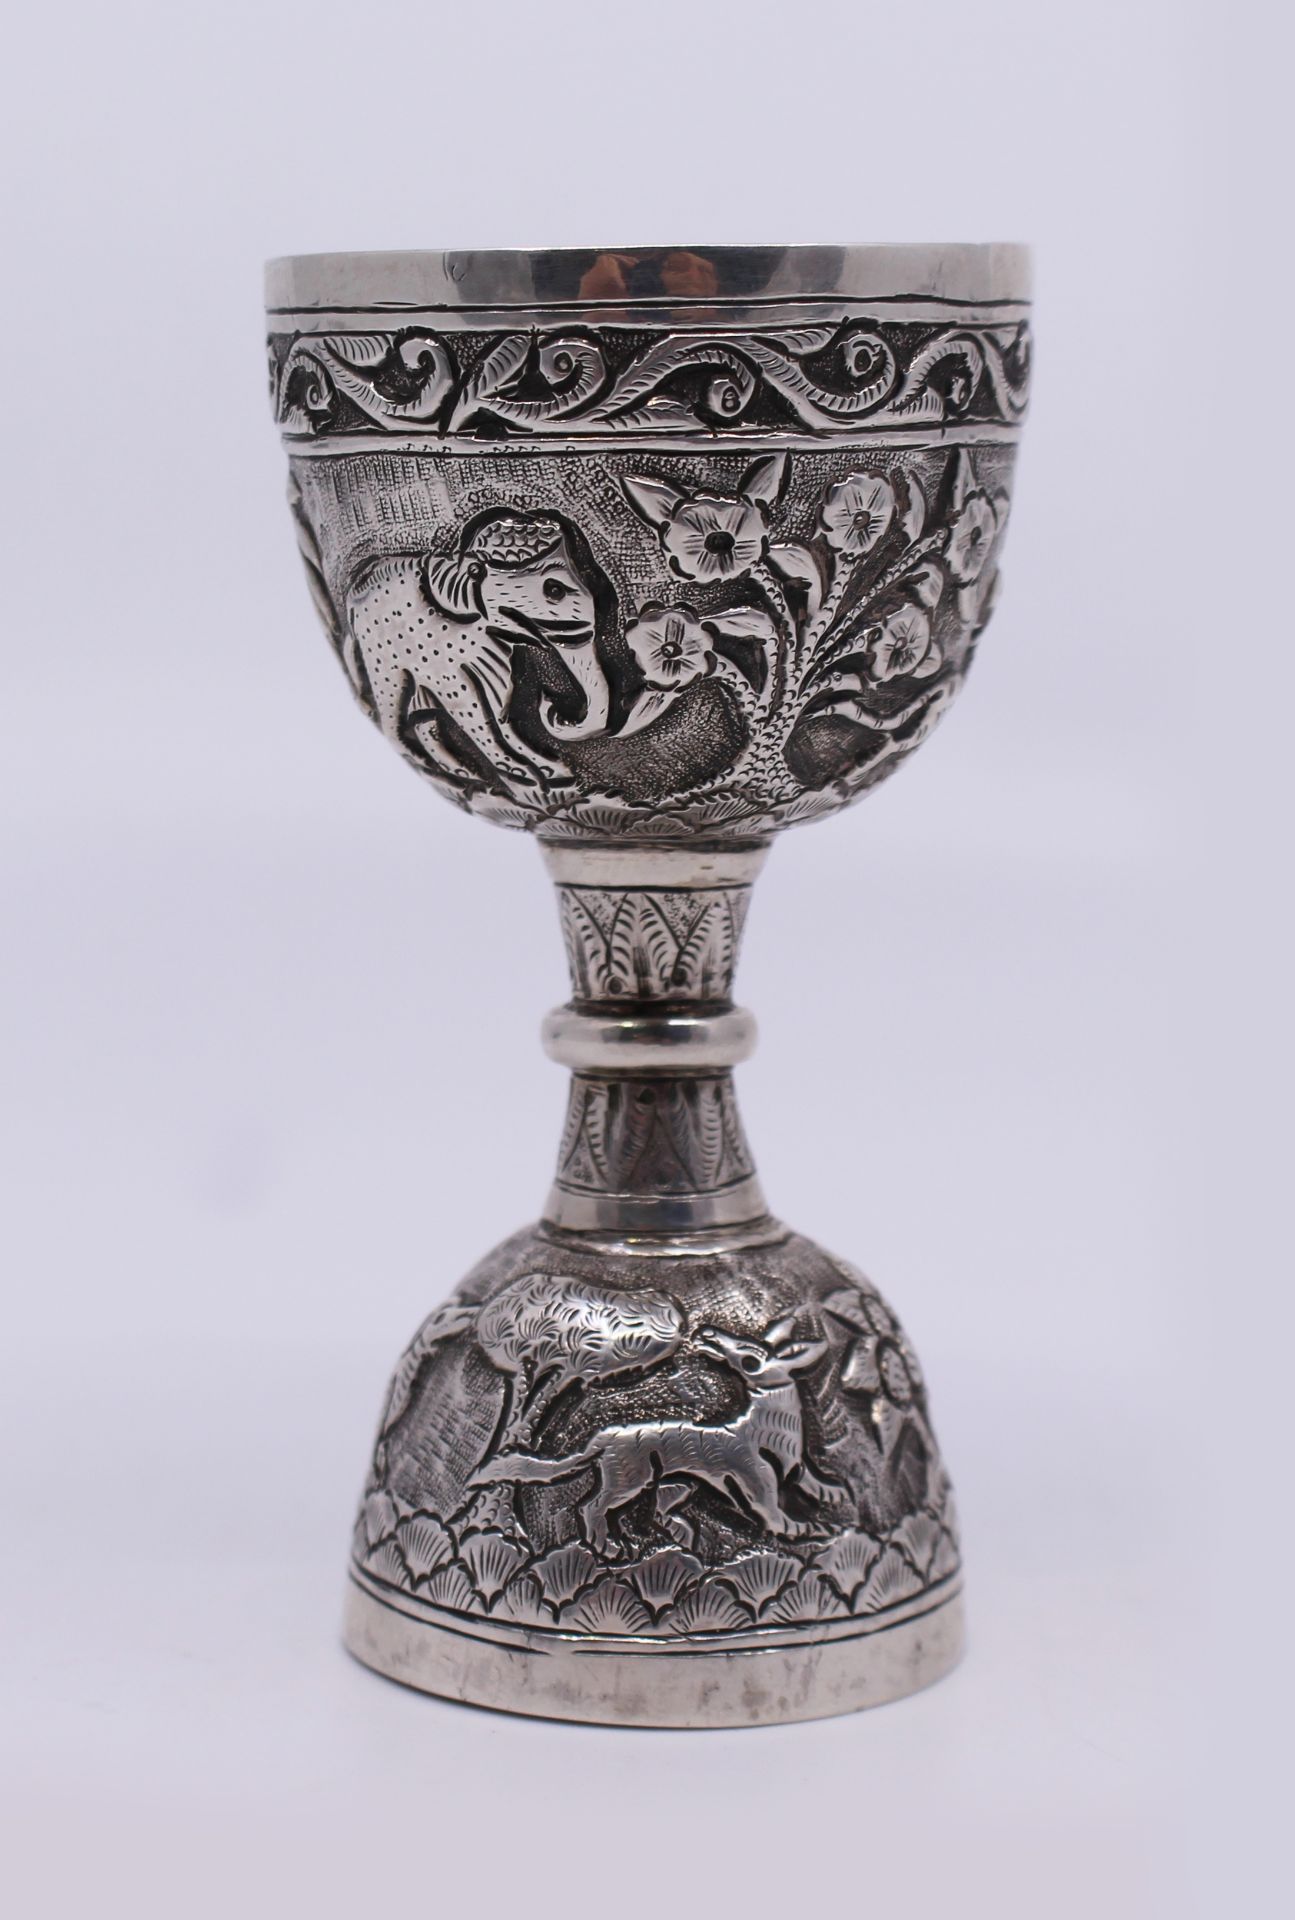 Late 19th c. Indian Silver Double Ended Measuring Cup - Image 4 of 6